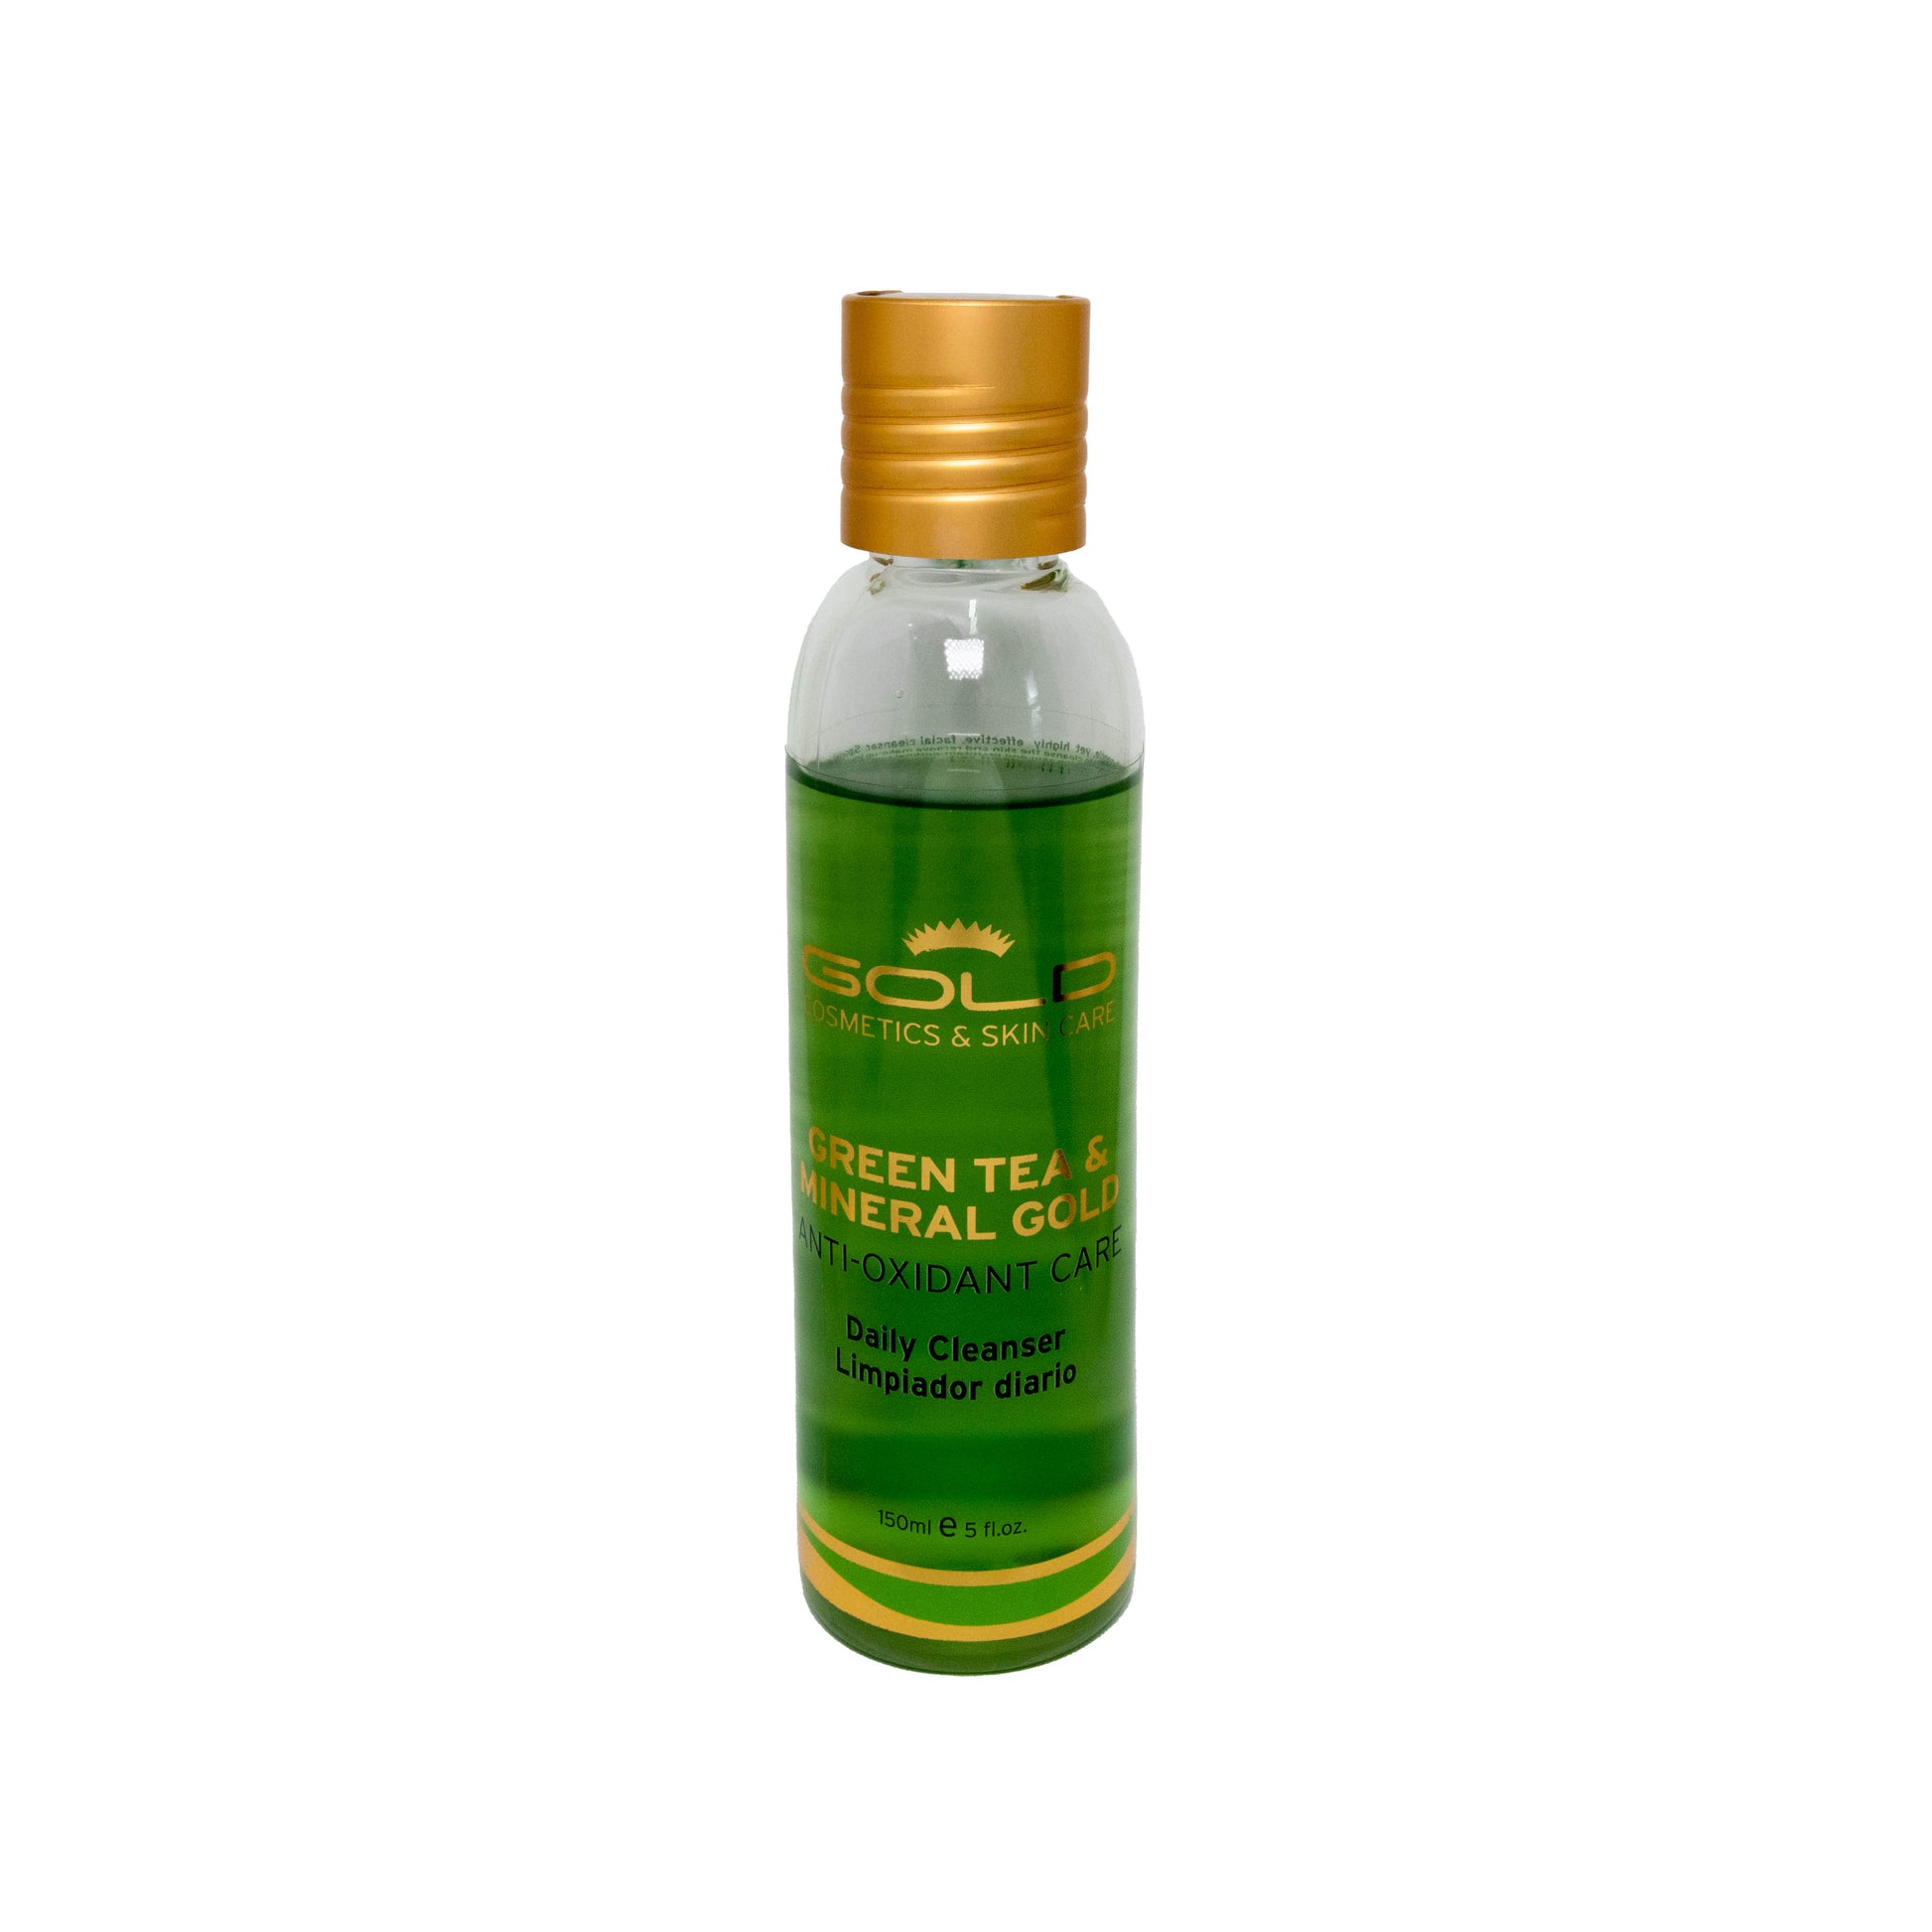 Gold Cosmetics | Green Tea & Mineral Gold Daily Cleanser | 150 ml - Gold Cosmetics & Skin Care